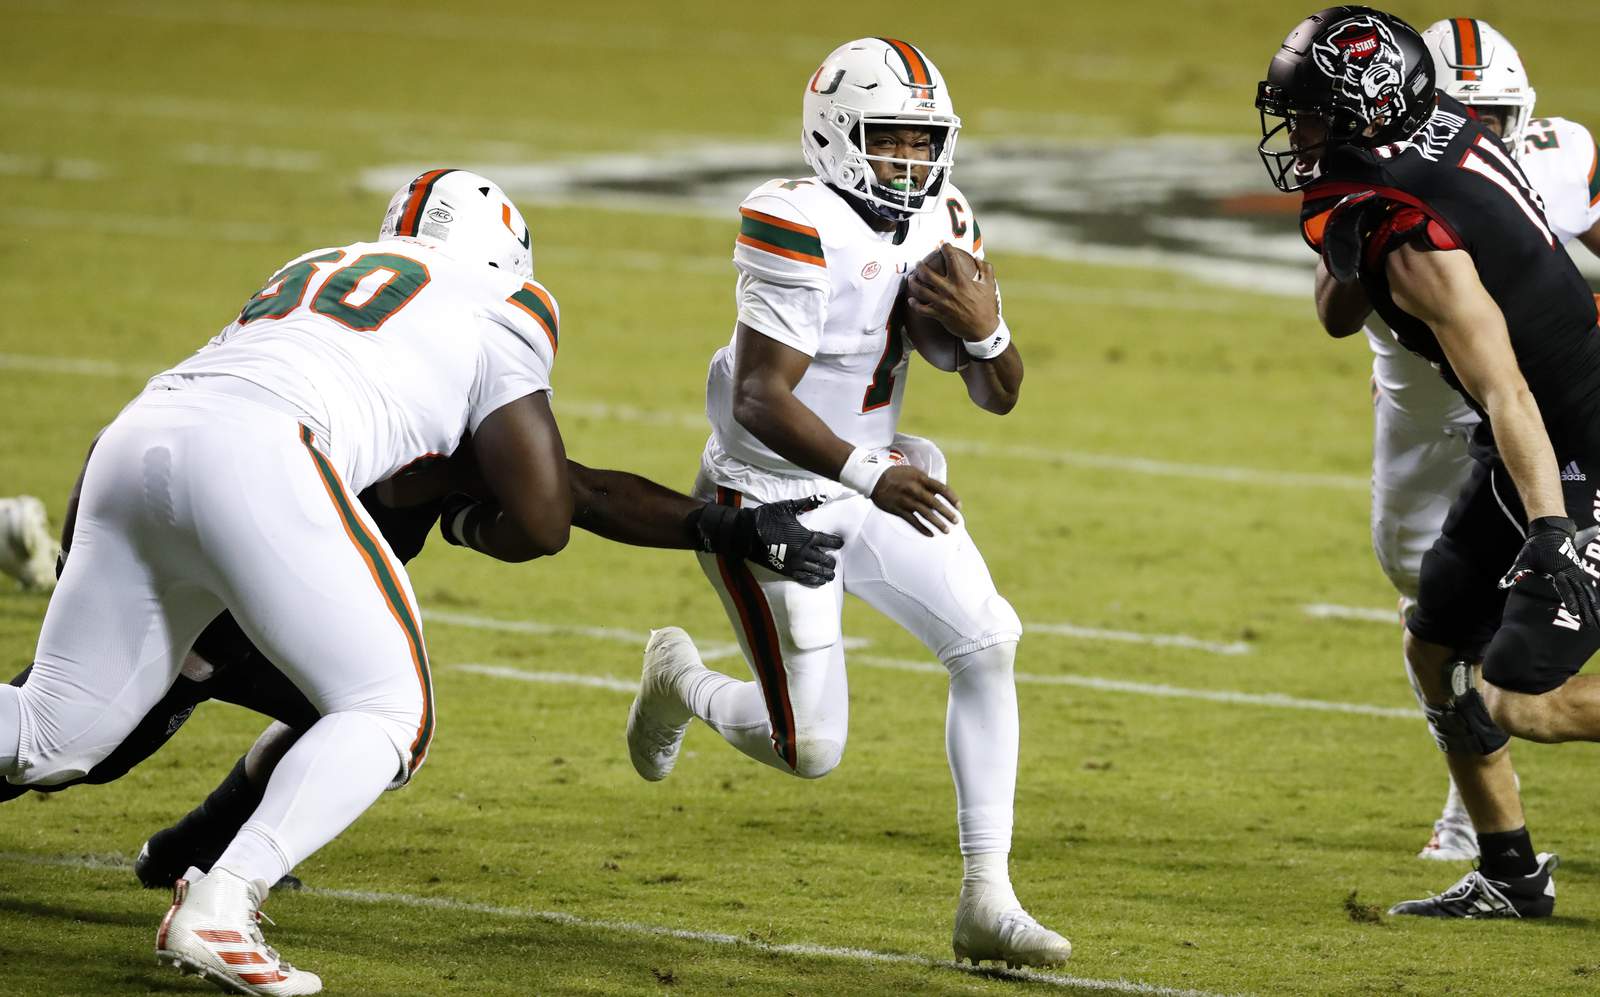 Hurricanes move up to No. 9 in AP Poll